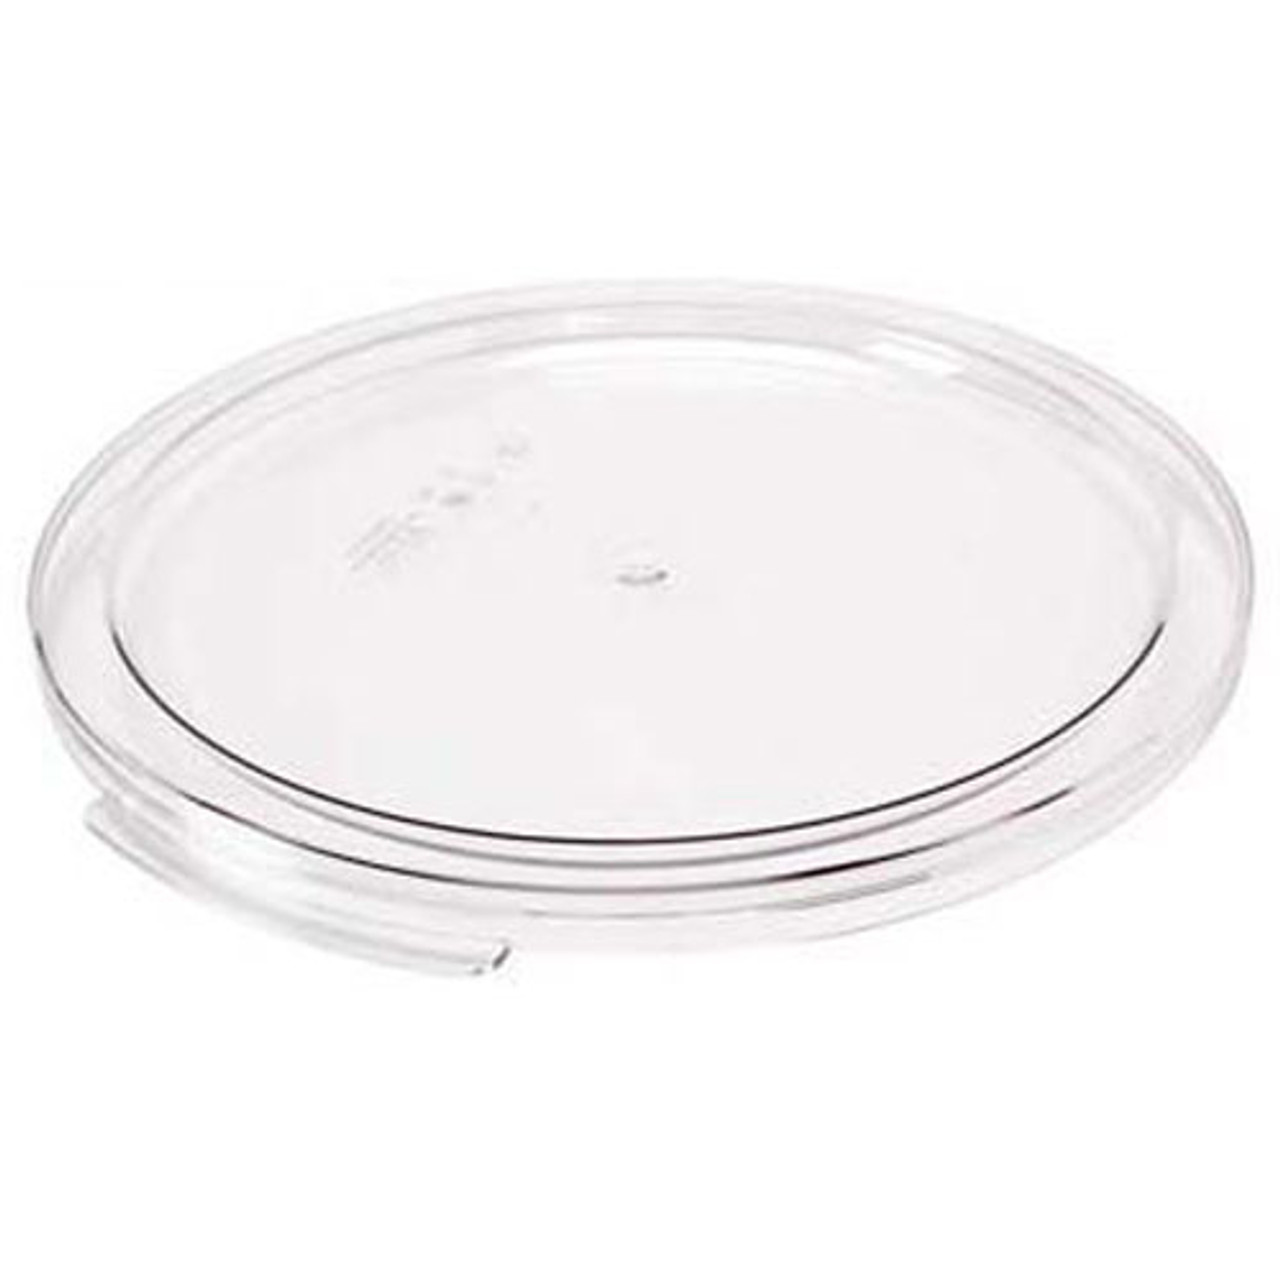 Lid Rd Clr 12-22 Qt - Replacement Part For Cambro RFSCWC12135